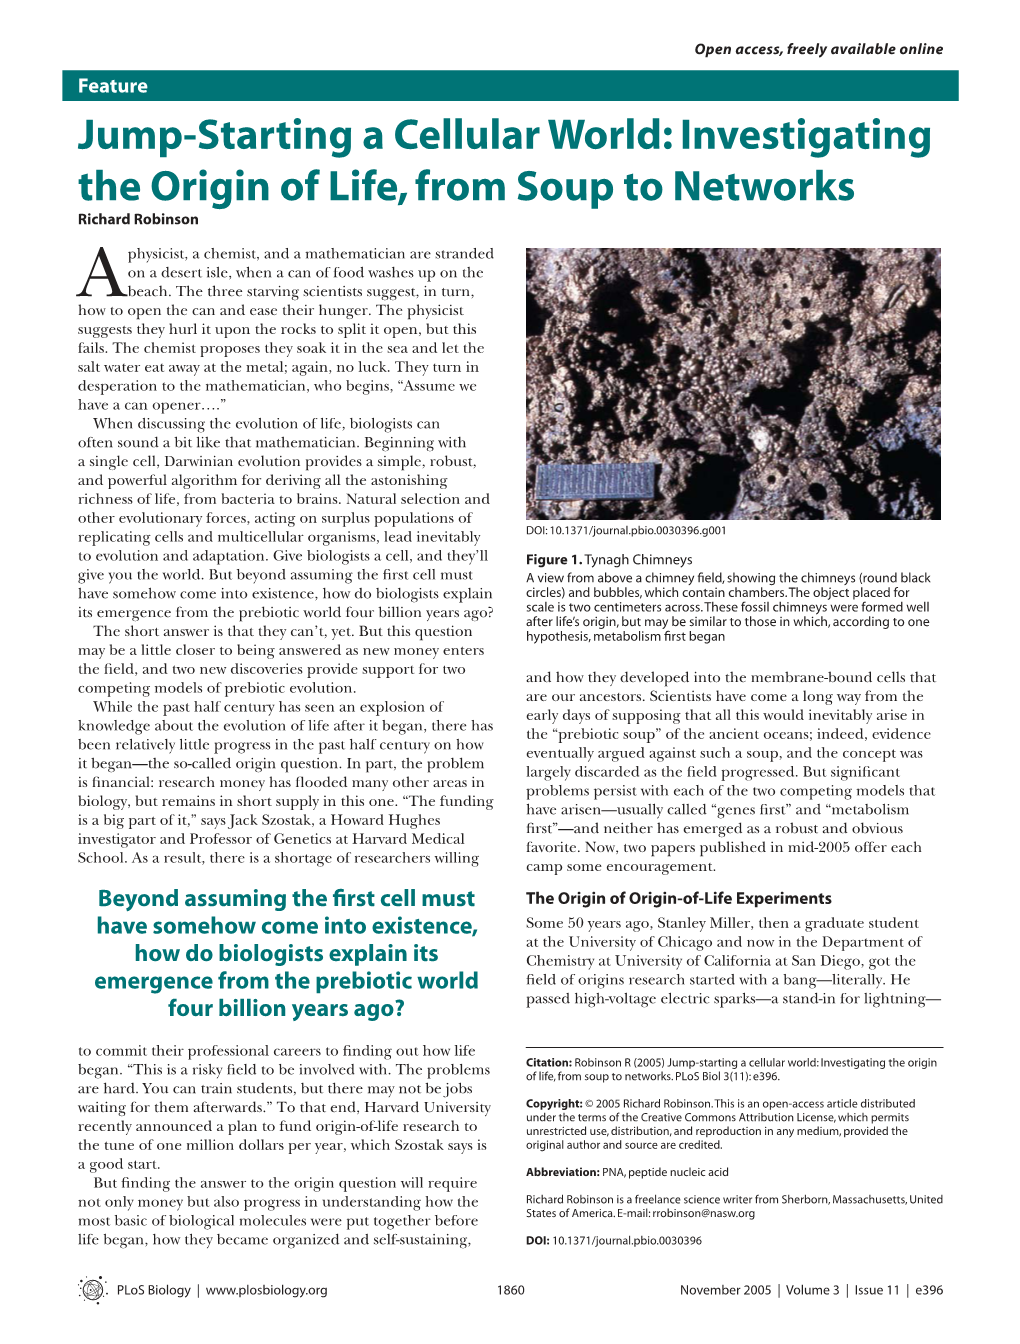 Jump-Starting a Cellular World: Investigating the Origin of Life, from Soup to Networks Richard Robinson